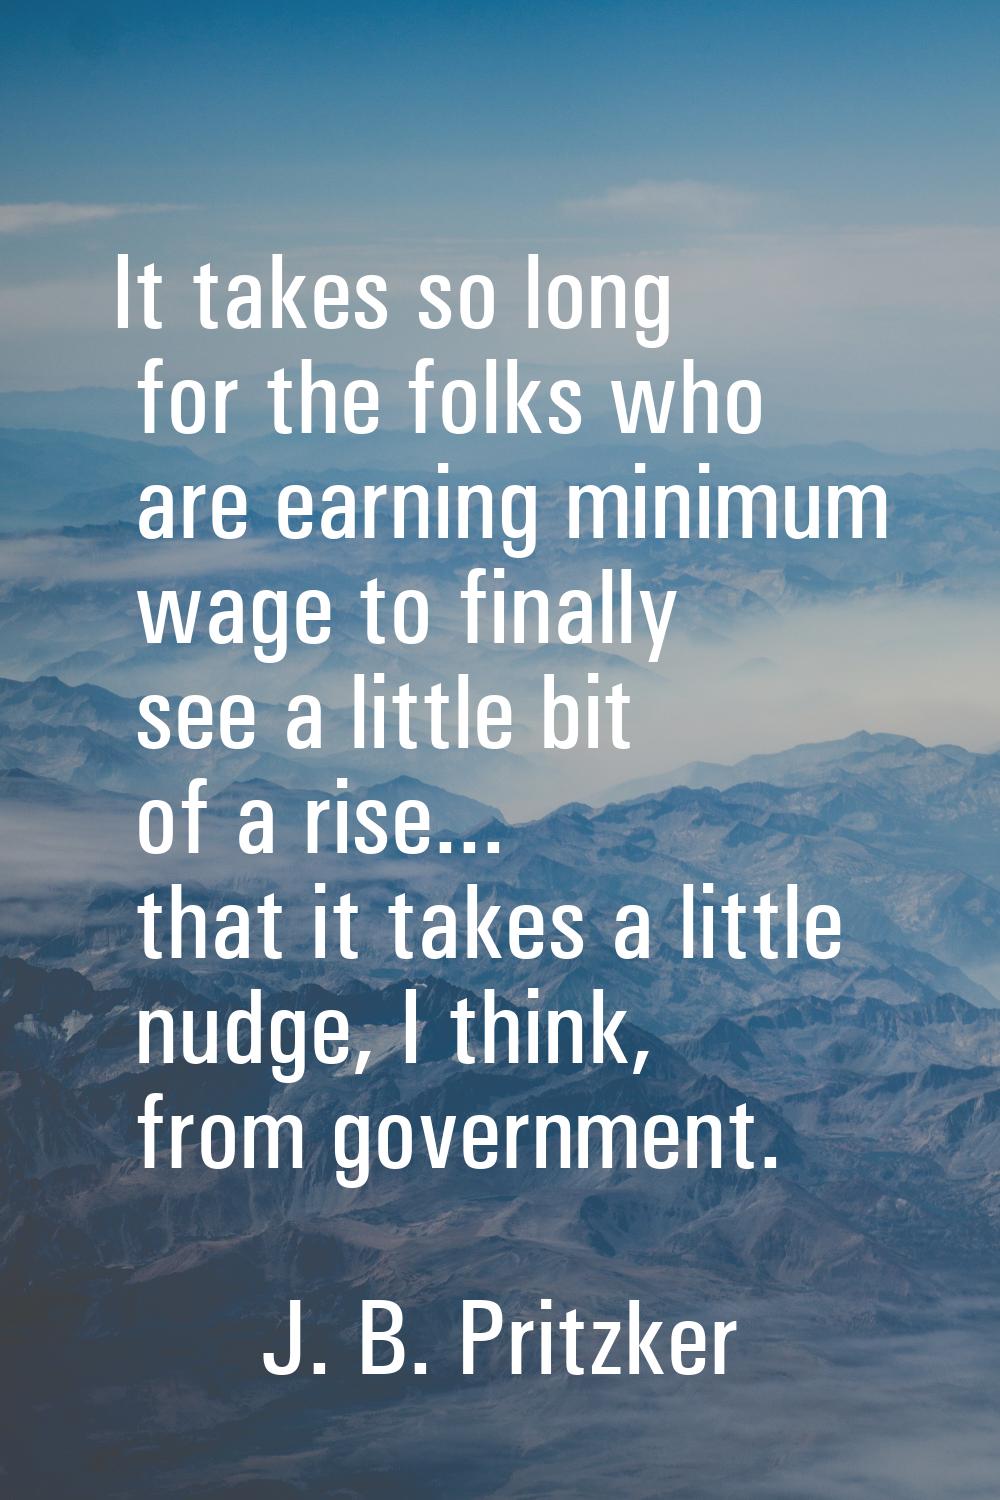 It takes so long for the folks who are earning minimum wage to finally see a little bit of a rise..